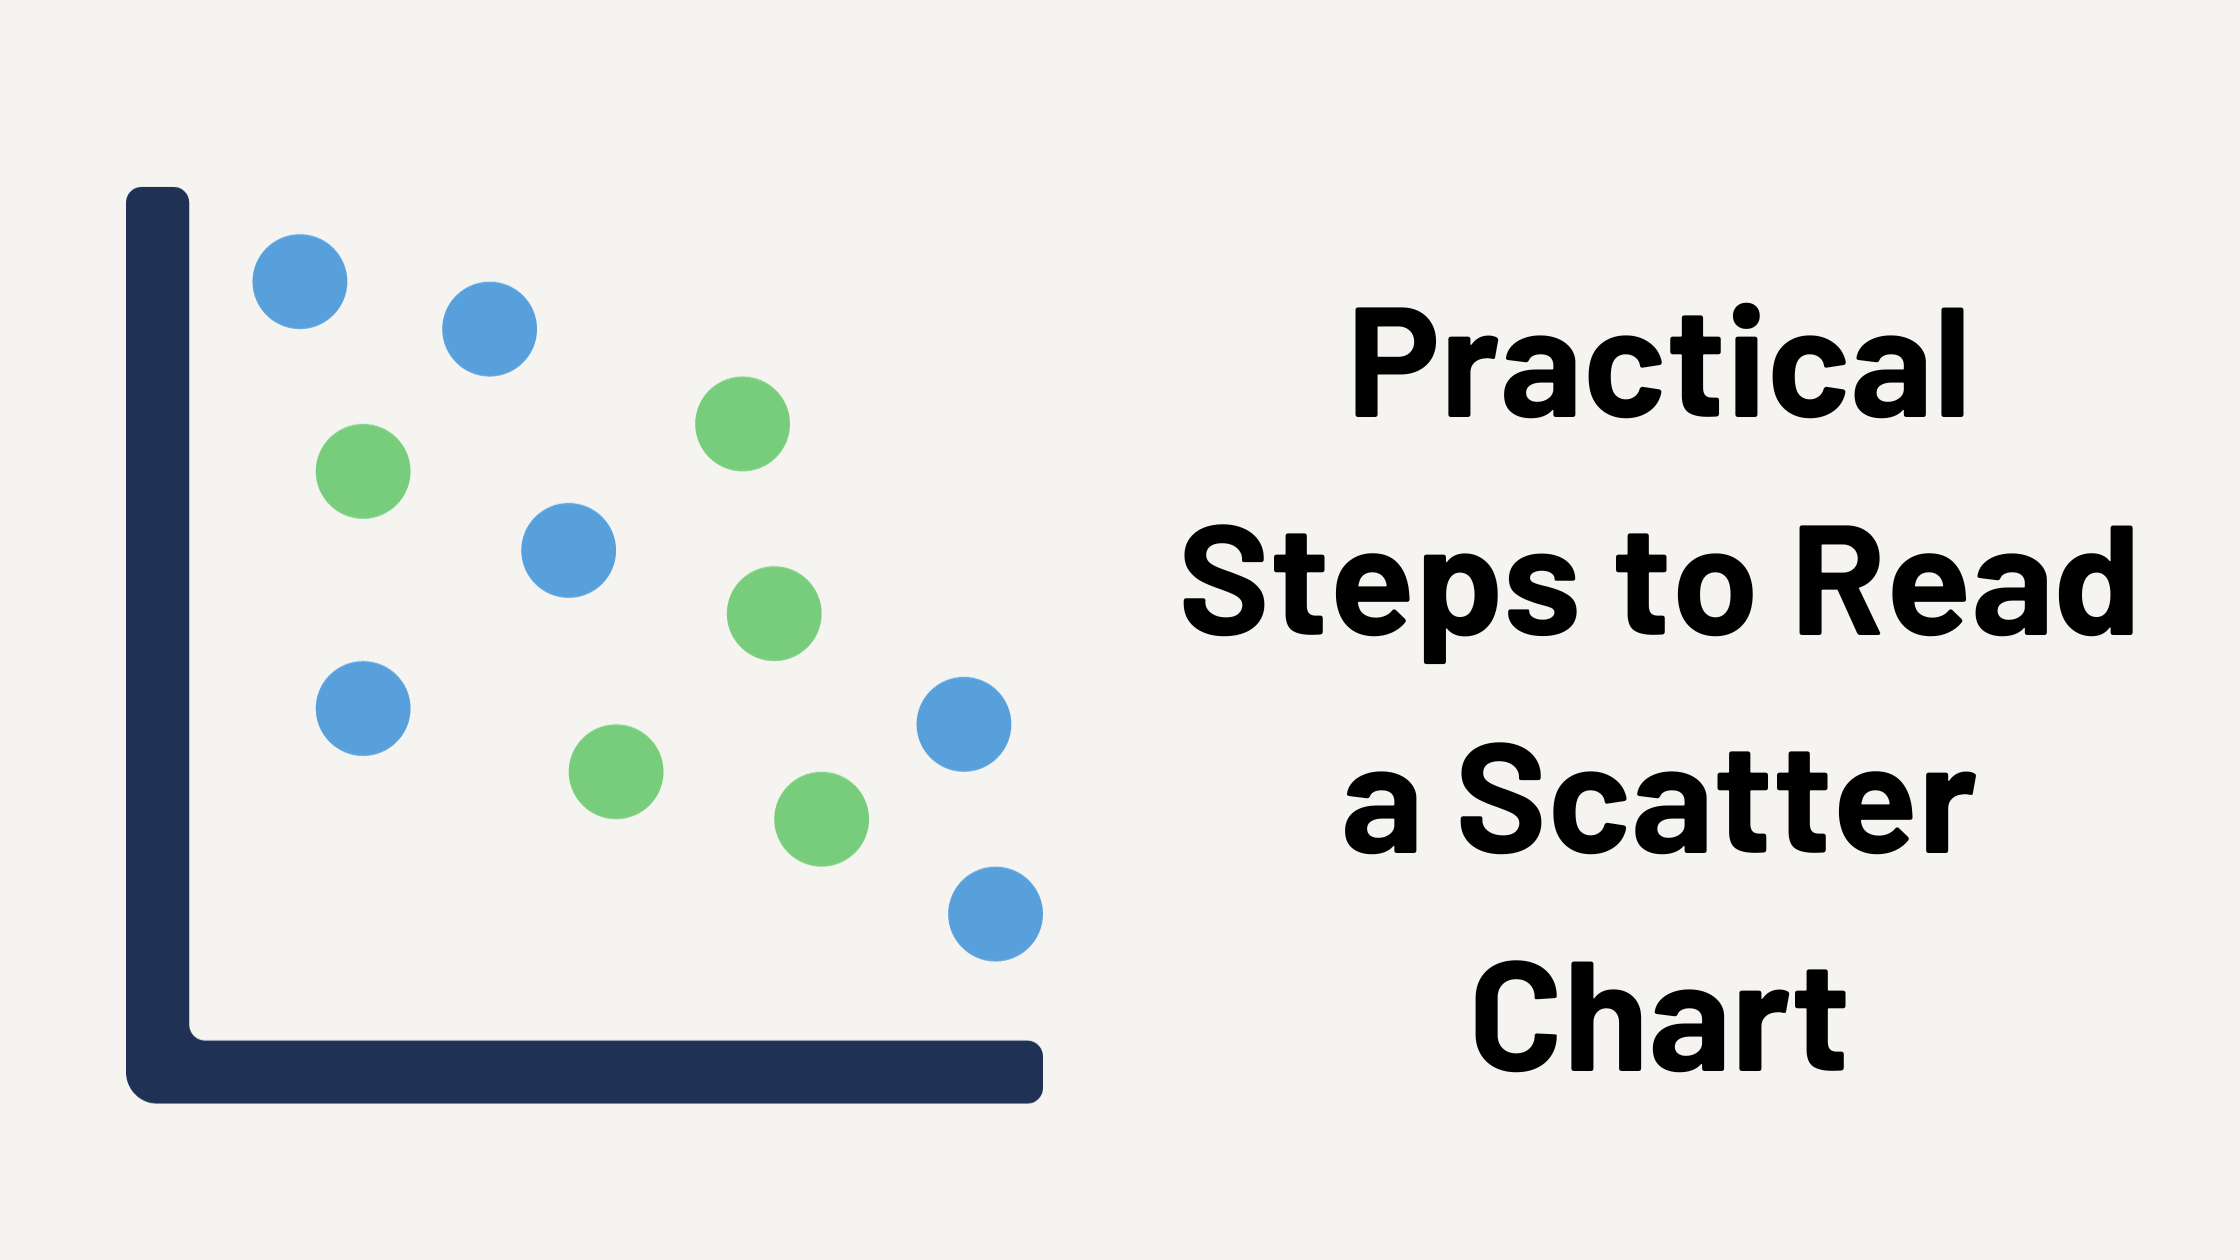 Practical Steps to Read a Scatter Chart